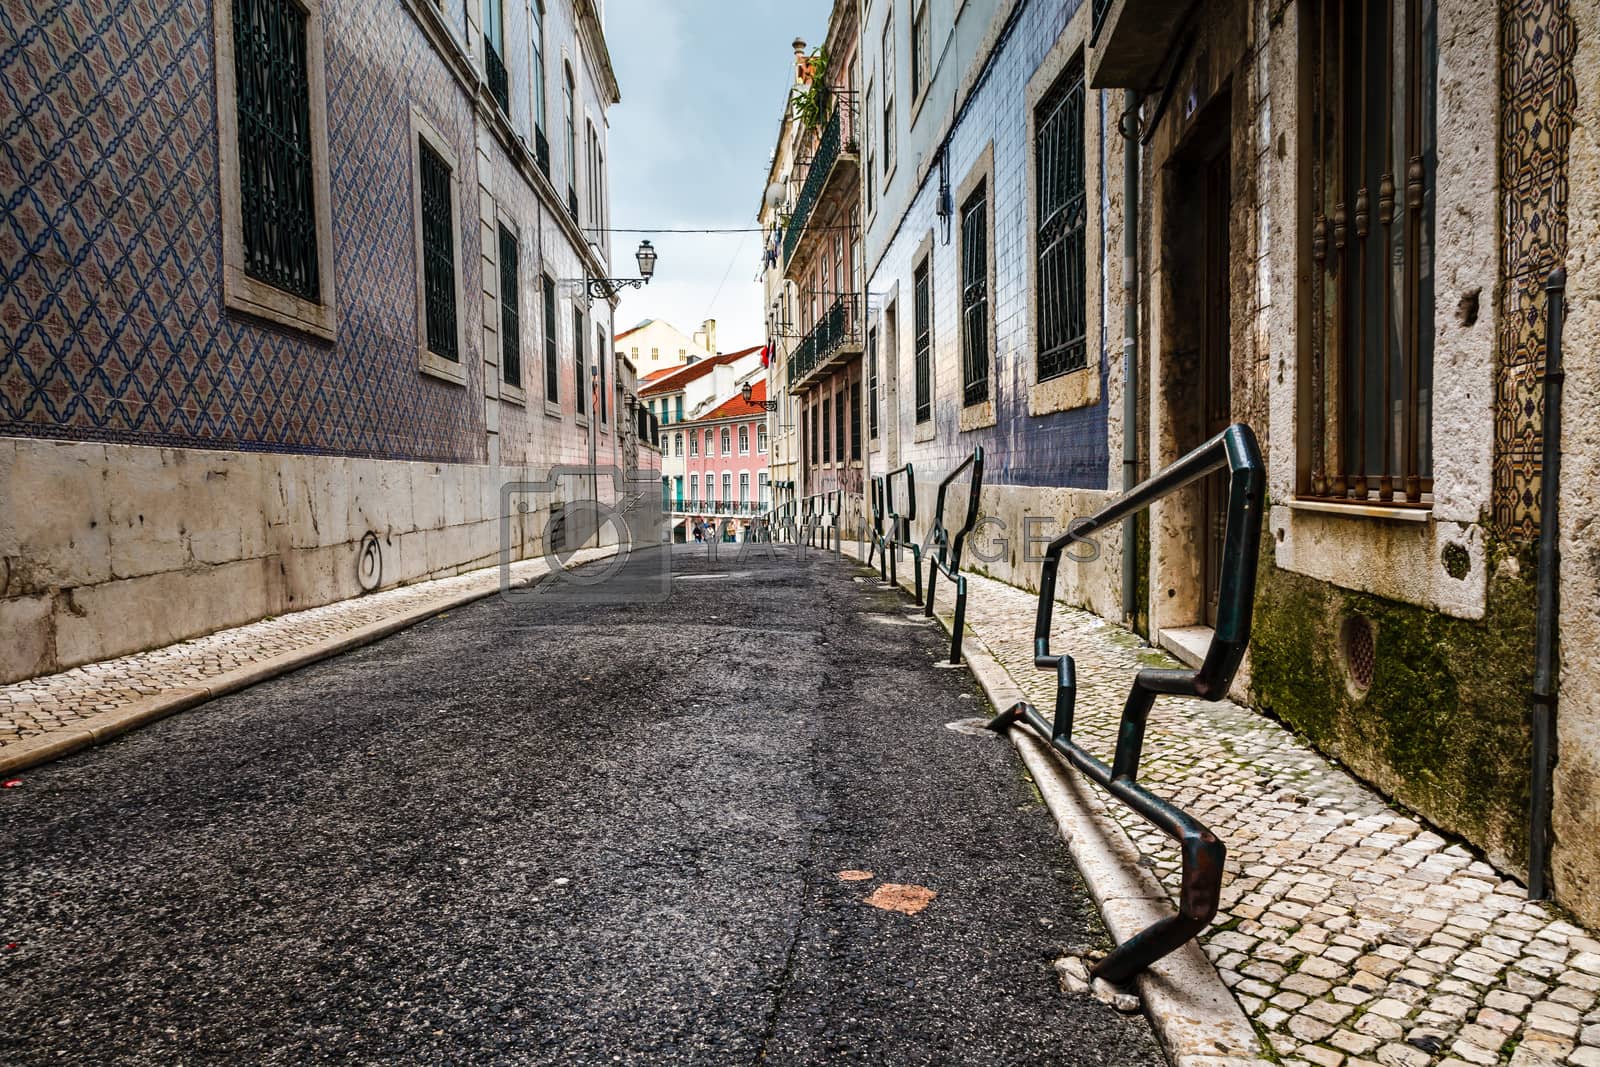 Royalty free image of Narrow Street in the Midieval Alfama District of Lisbon, Portuga by anshar